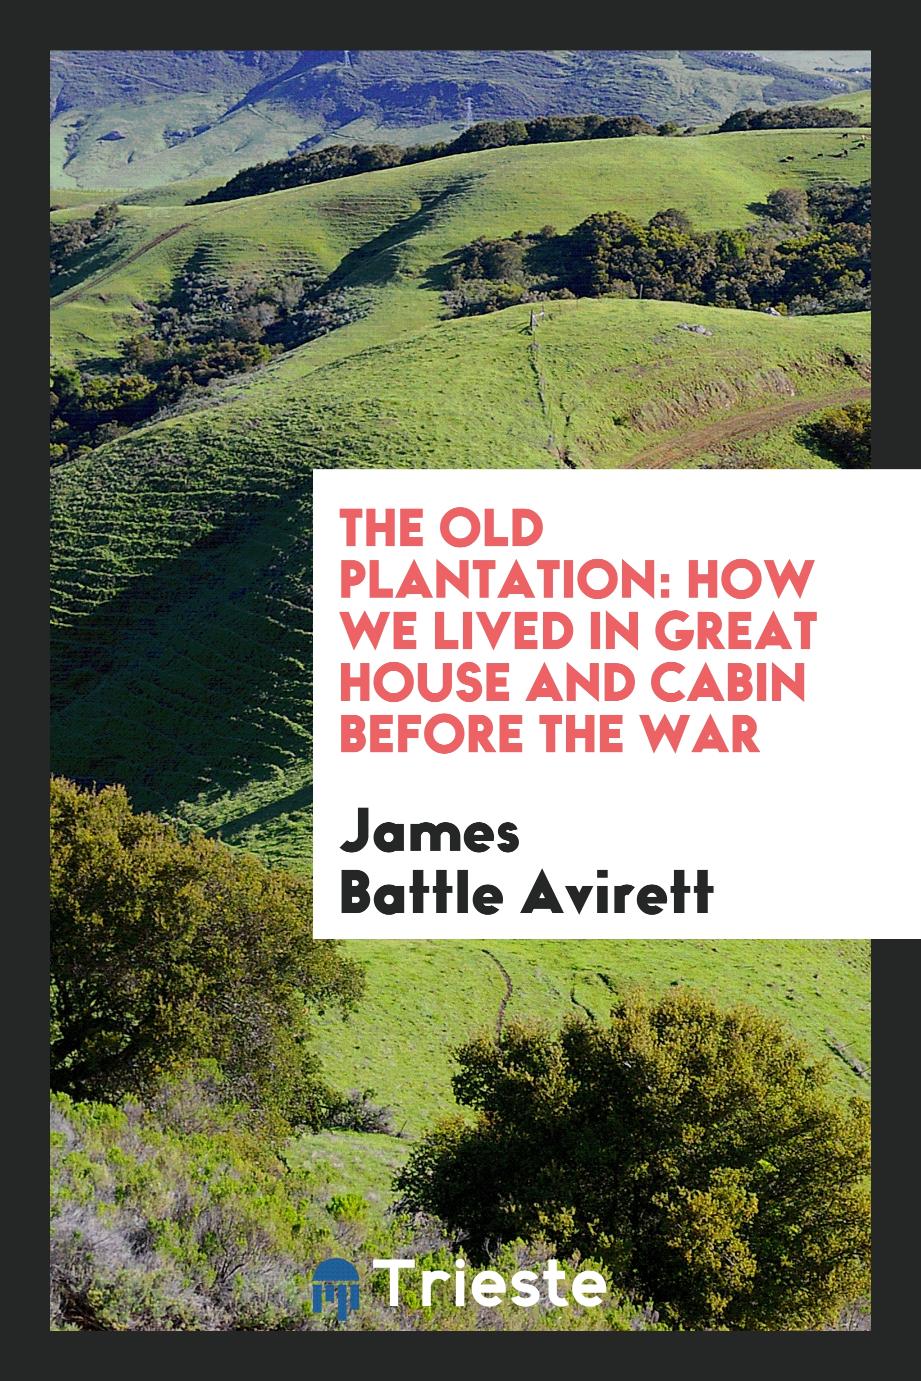 The old plantation: how we lived in great house and cabin before the war